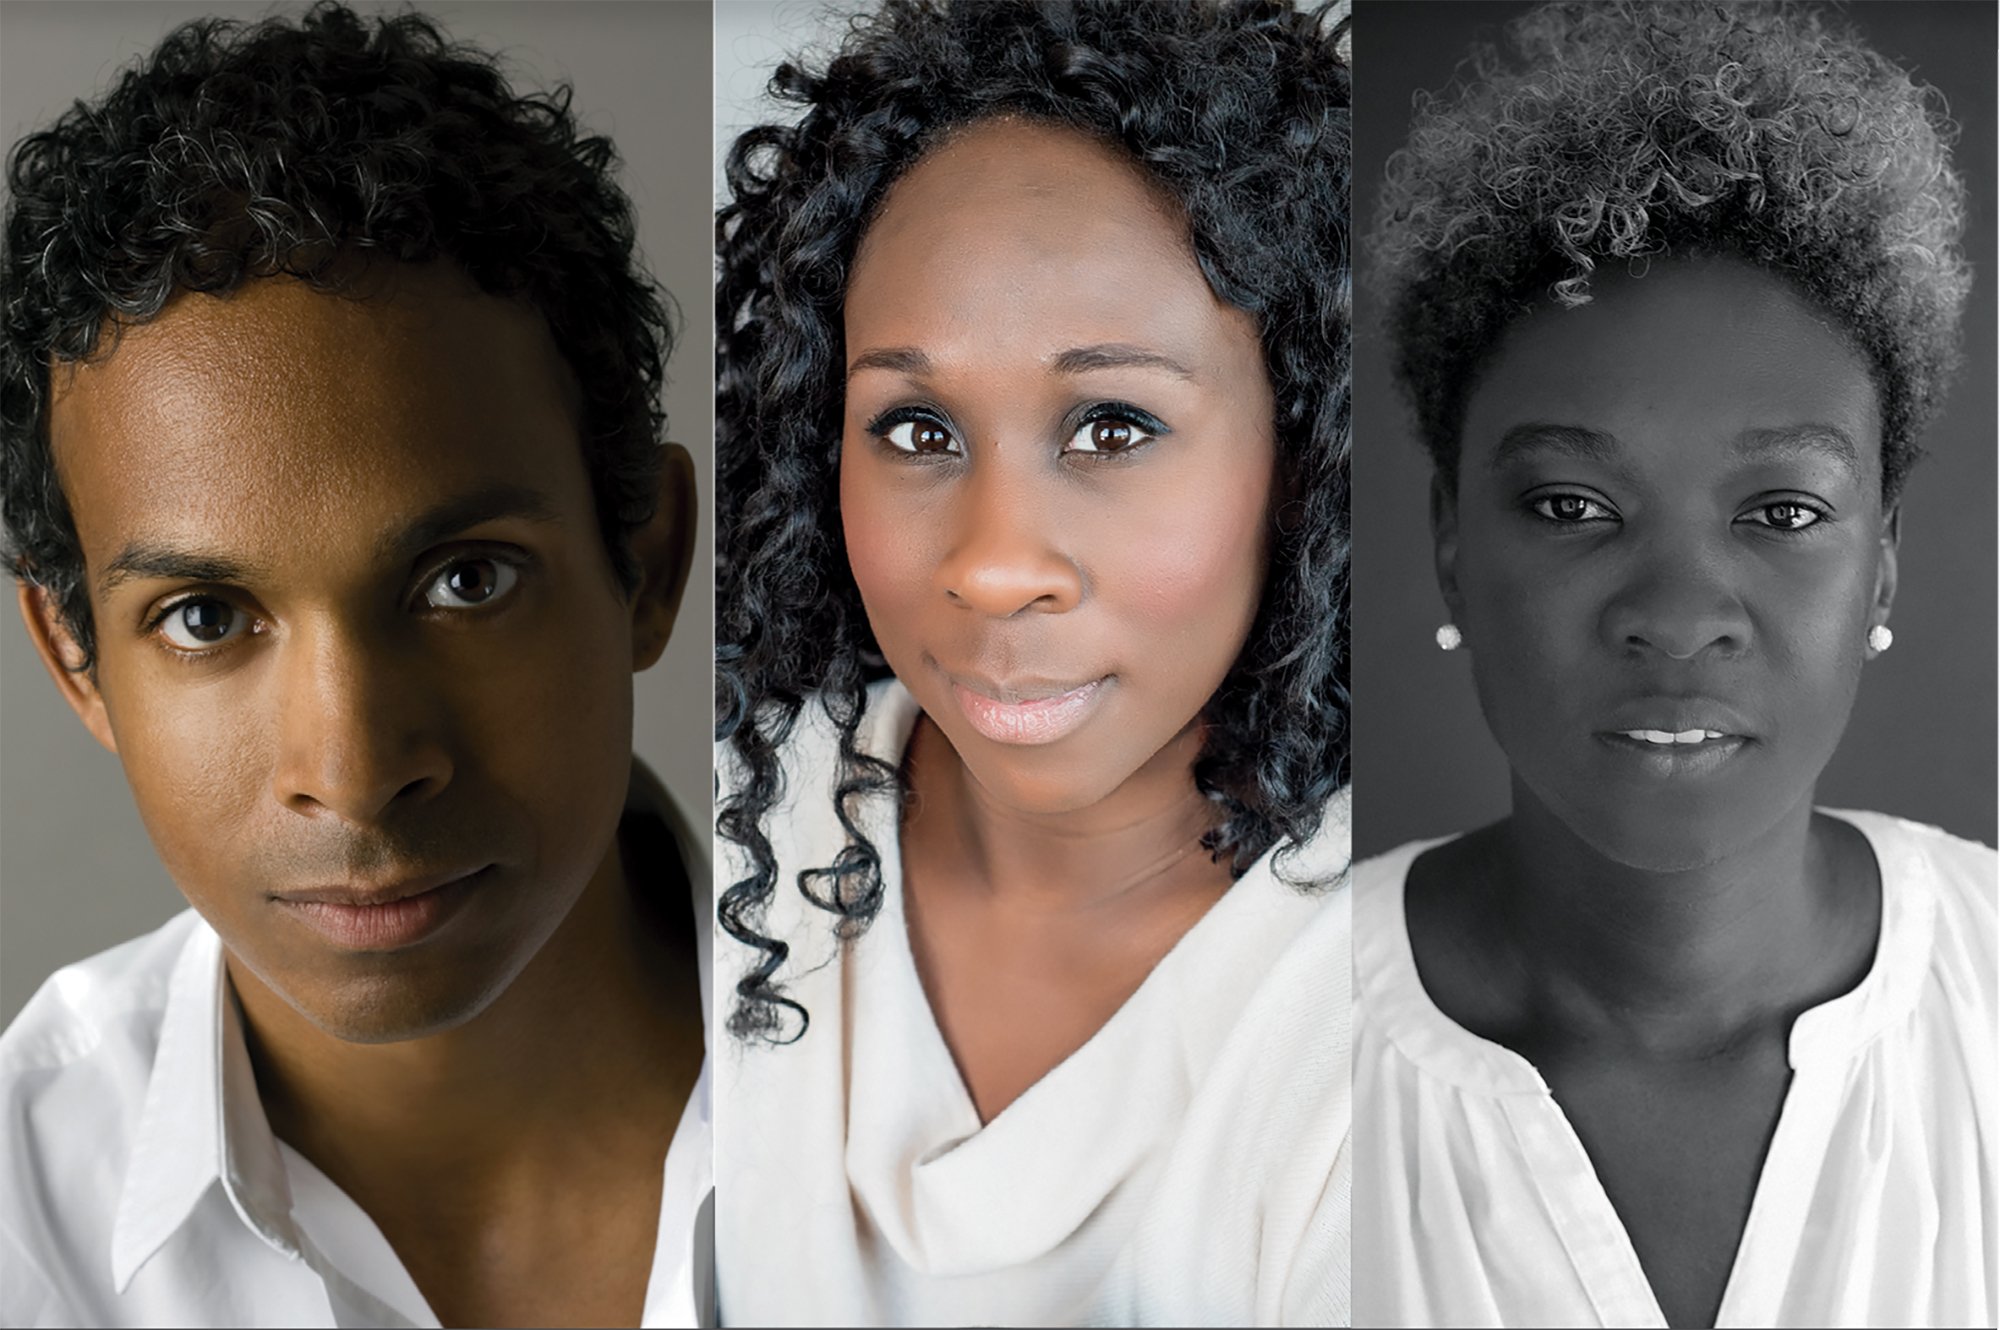 Photos of 2021 Journey Prize judges David Chariandy, Esi Edugyan, and Canisia Lubrin